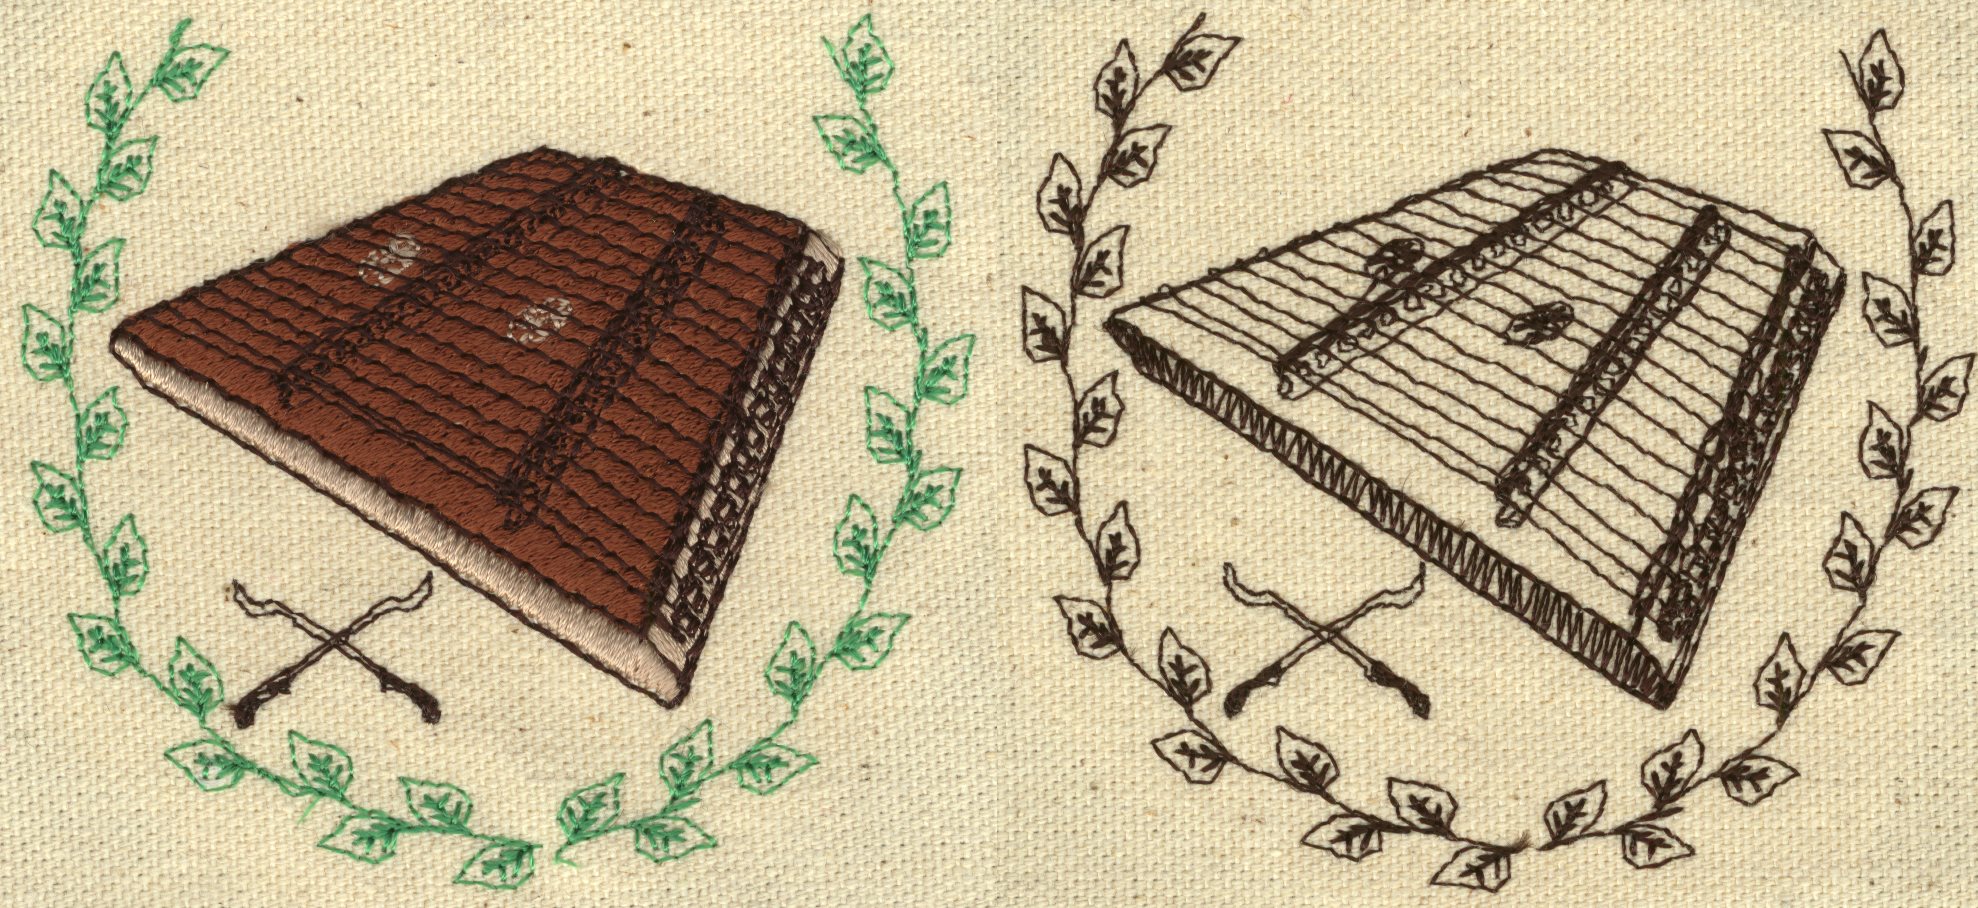 Hammered Dulcimer Embroidery Design Examples